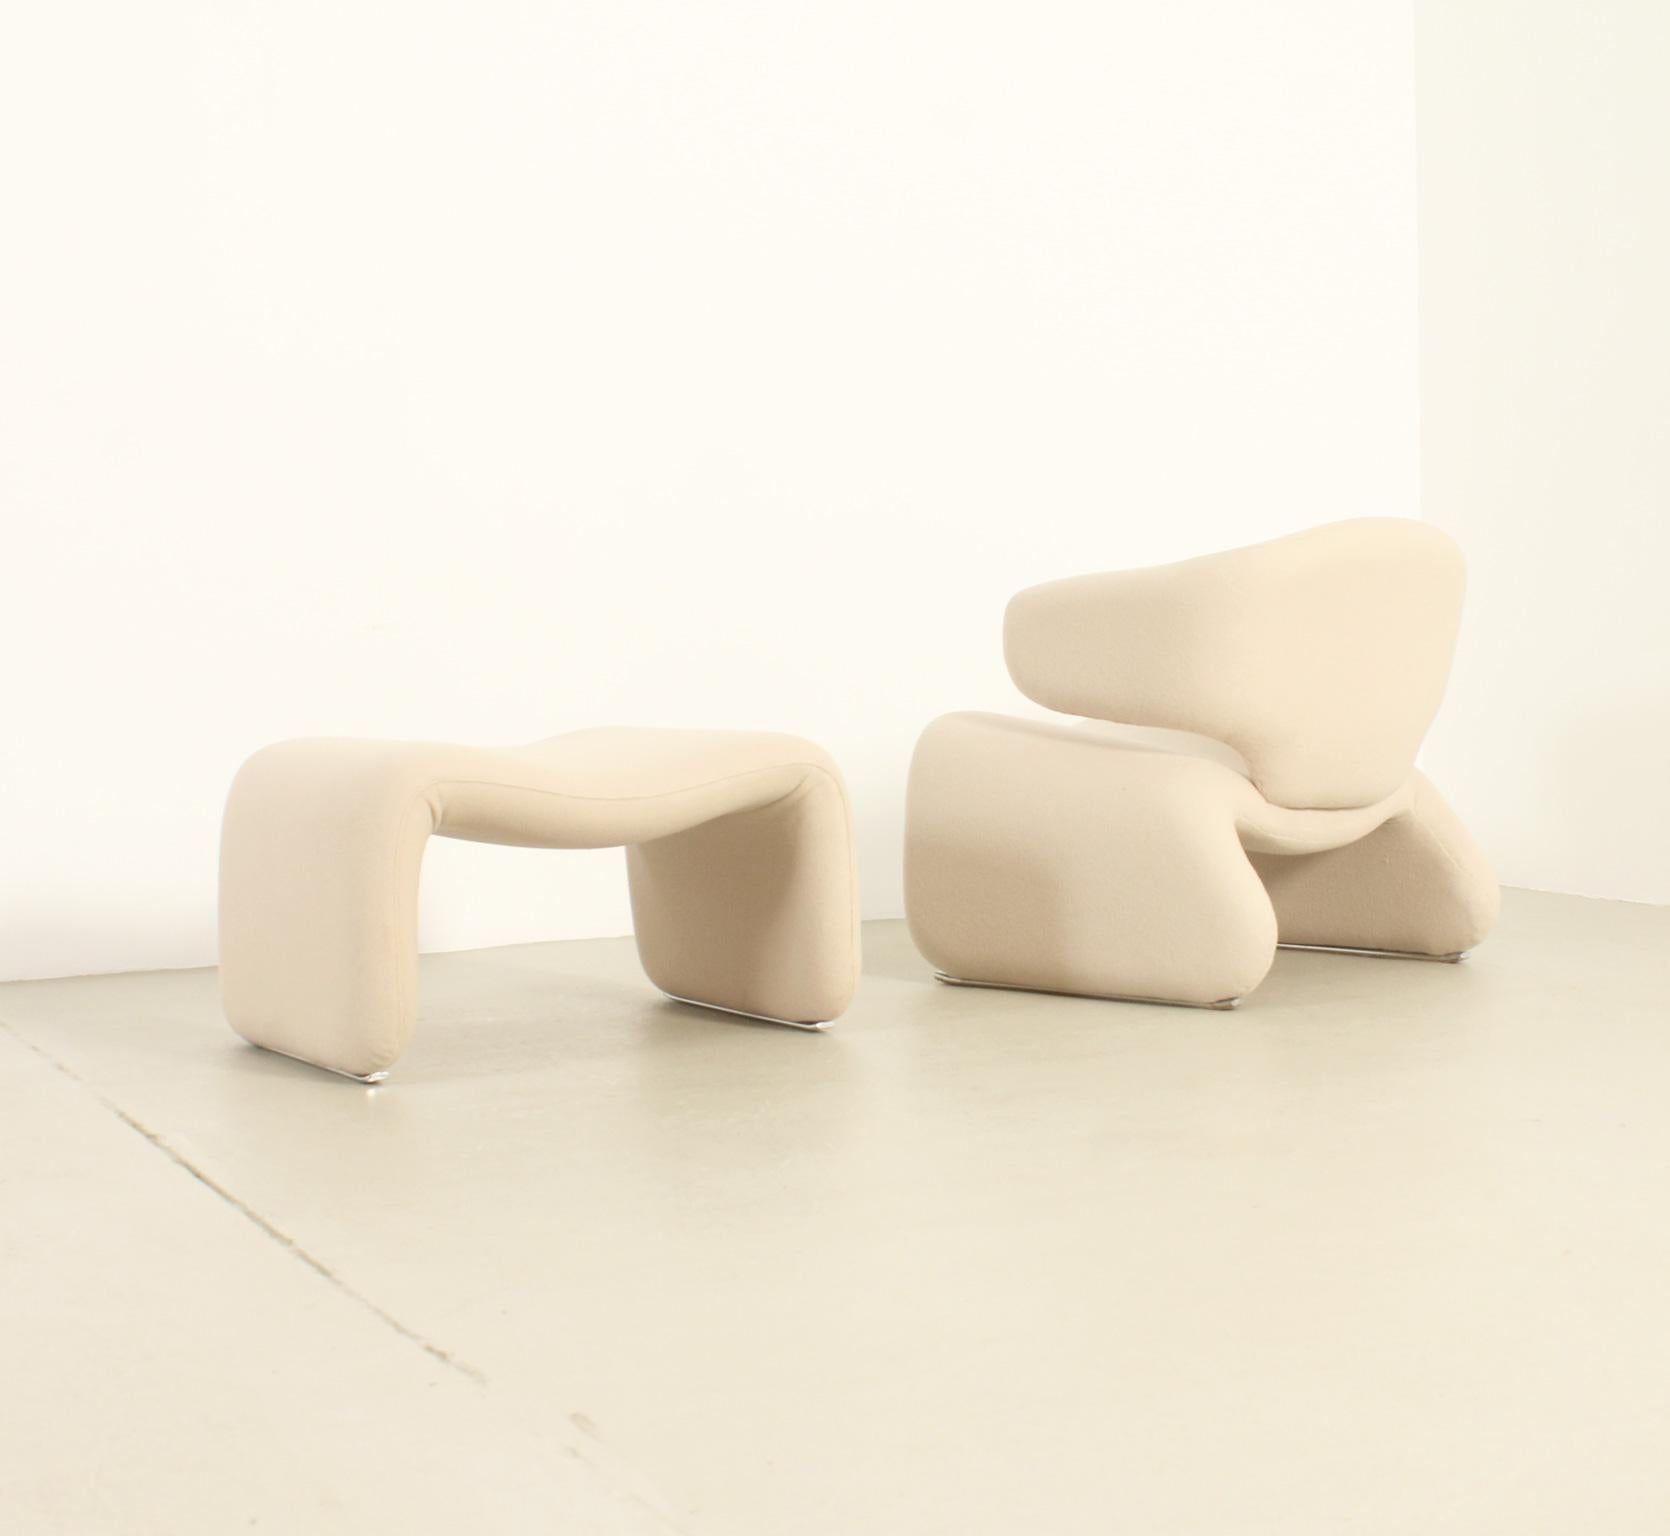 Dijnn Armchair and Ottoman by Olivier Mourgue for Airborne, France, 1965 For Sale 6